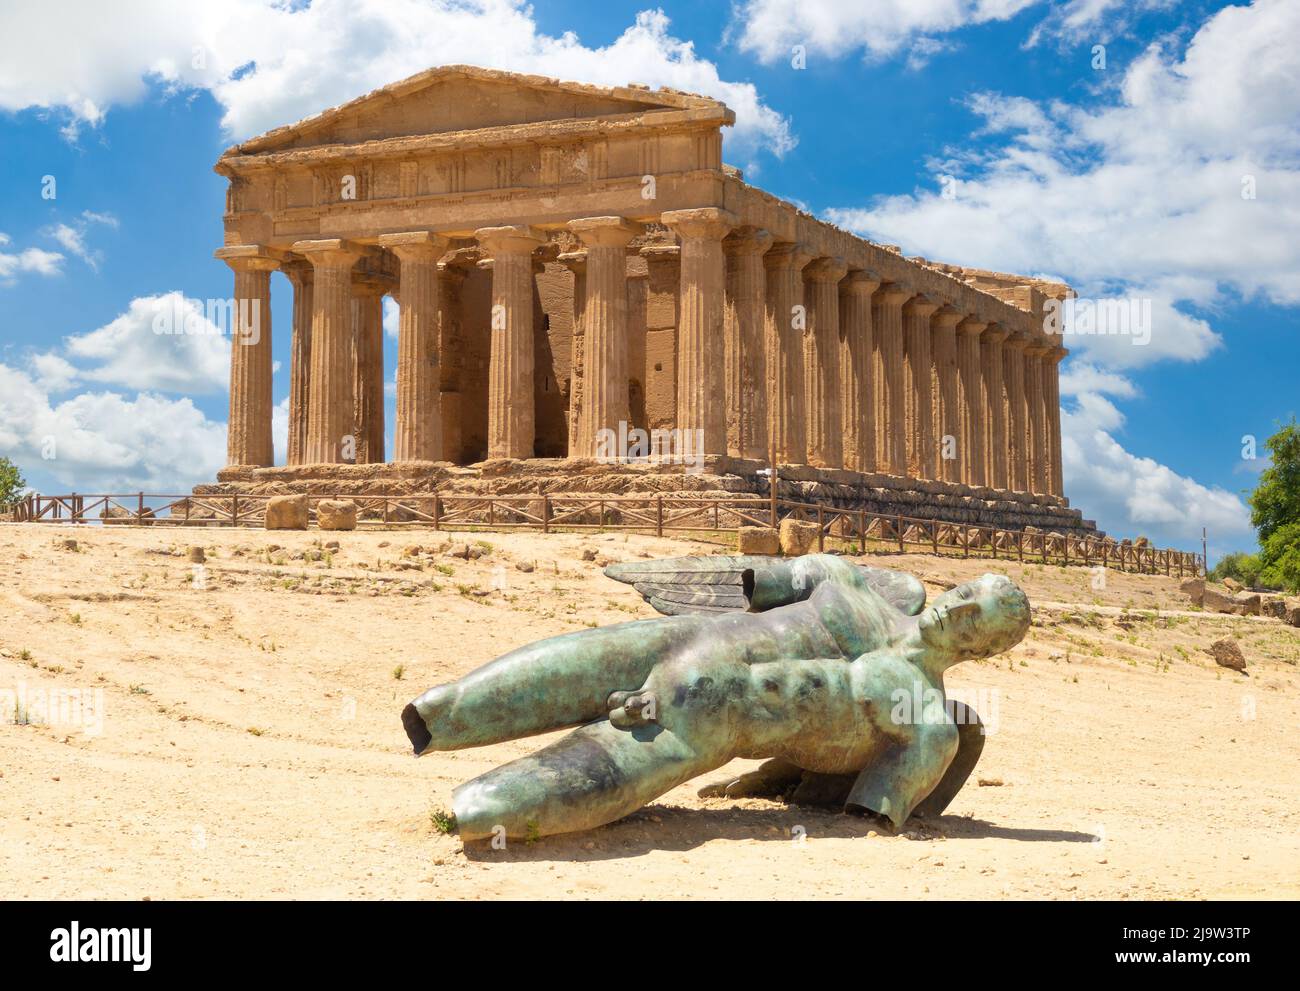 Agrigento (Sicilia, Italy) - The orange Agrigento city, beside the sea, Sicily region, famous for Valle dei Templi archeological site of greek temples Stock Photo